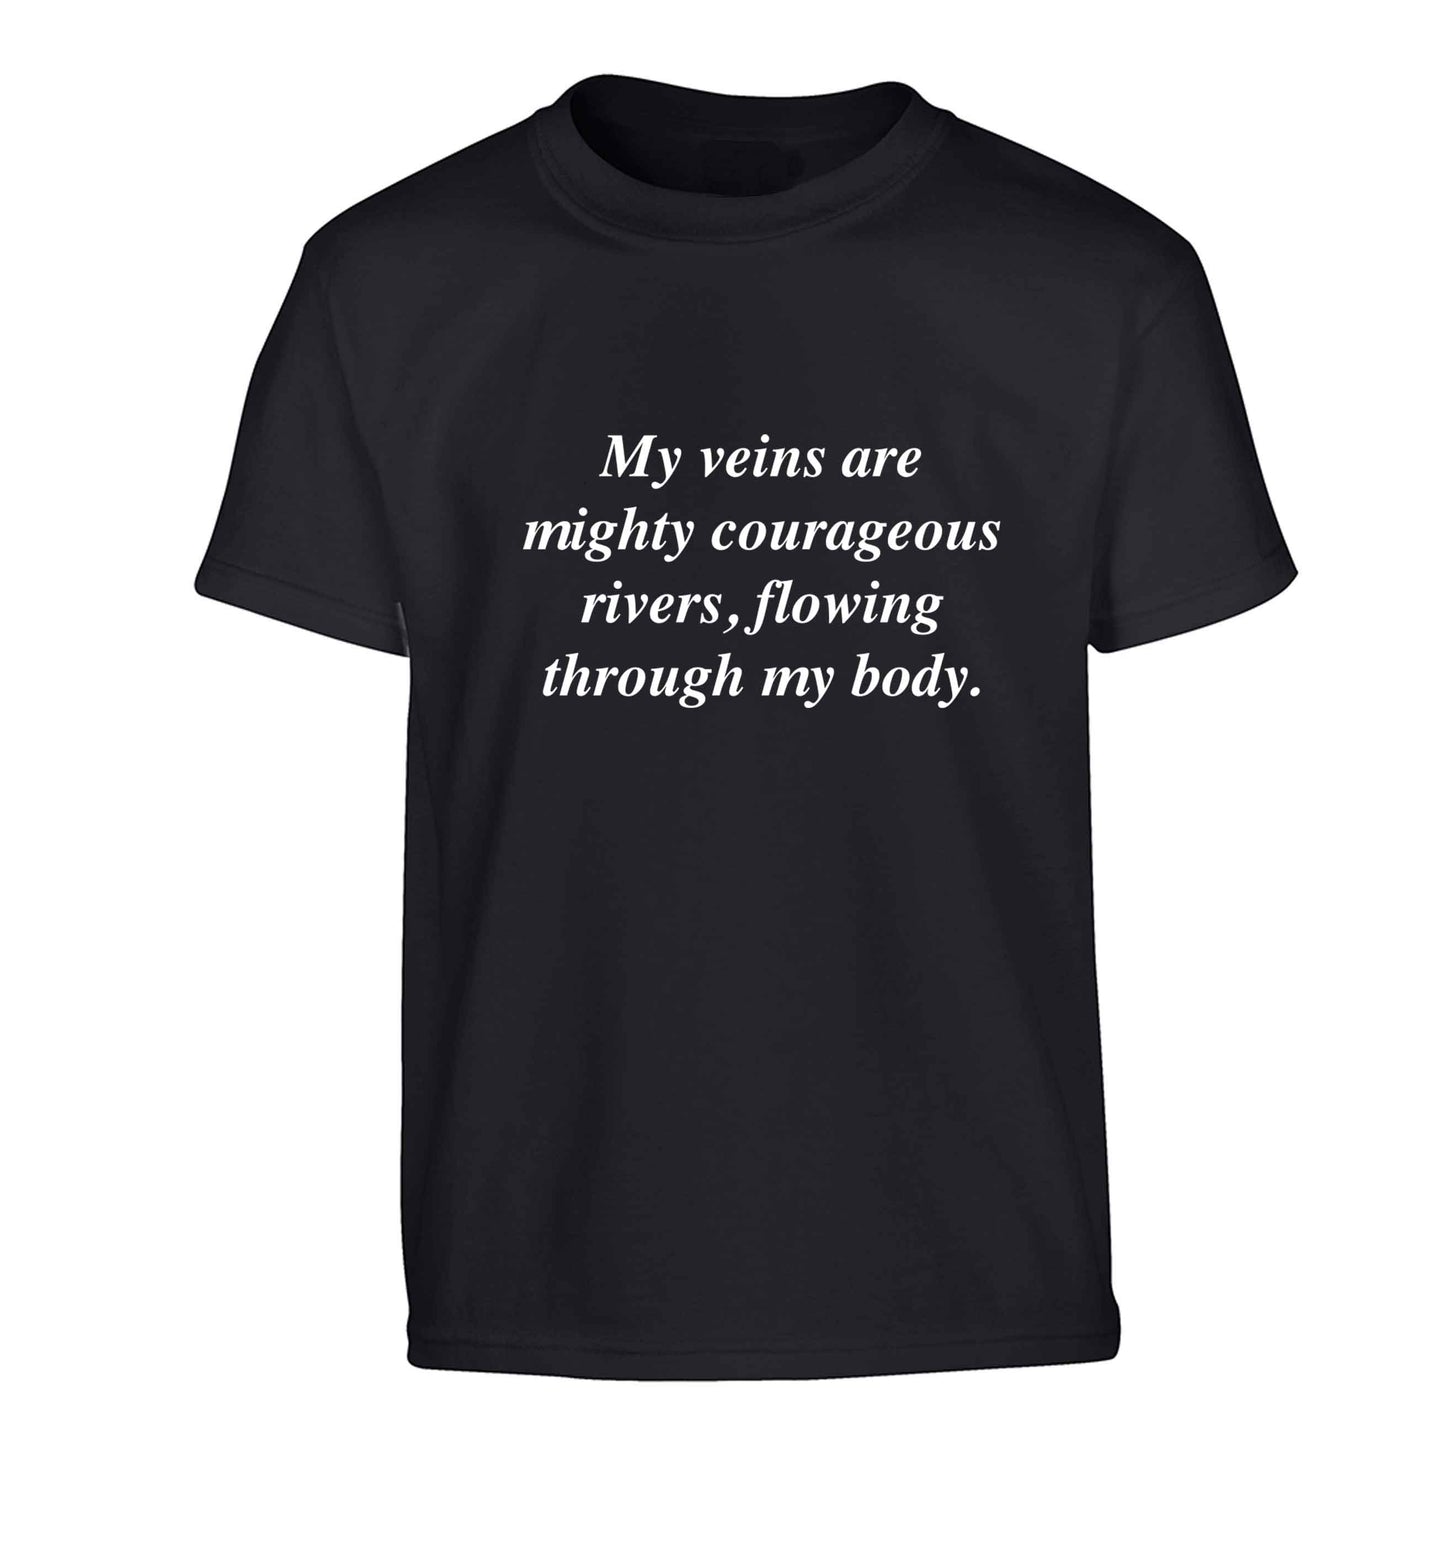 My veins are mighty courageous rivers, flowing through my body Children's black Tshirt 12-13 Years